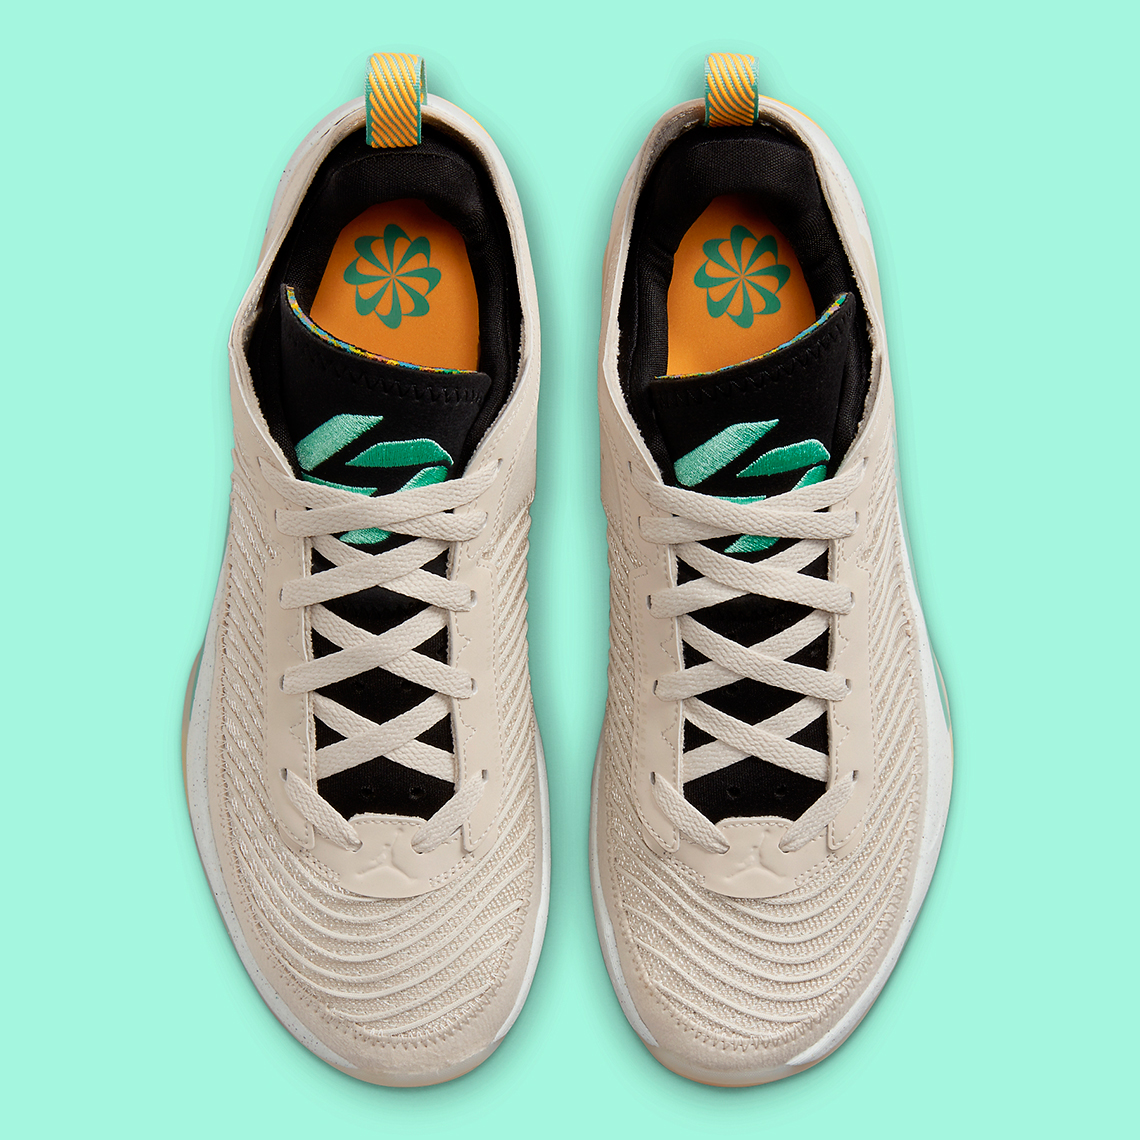 The Air Jordan 30 is expected to first debut during this year's Tan Citrus Dr9830 130 4